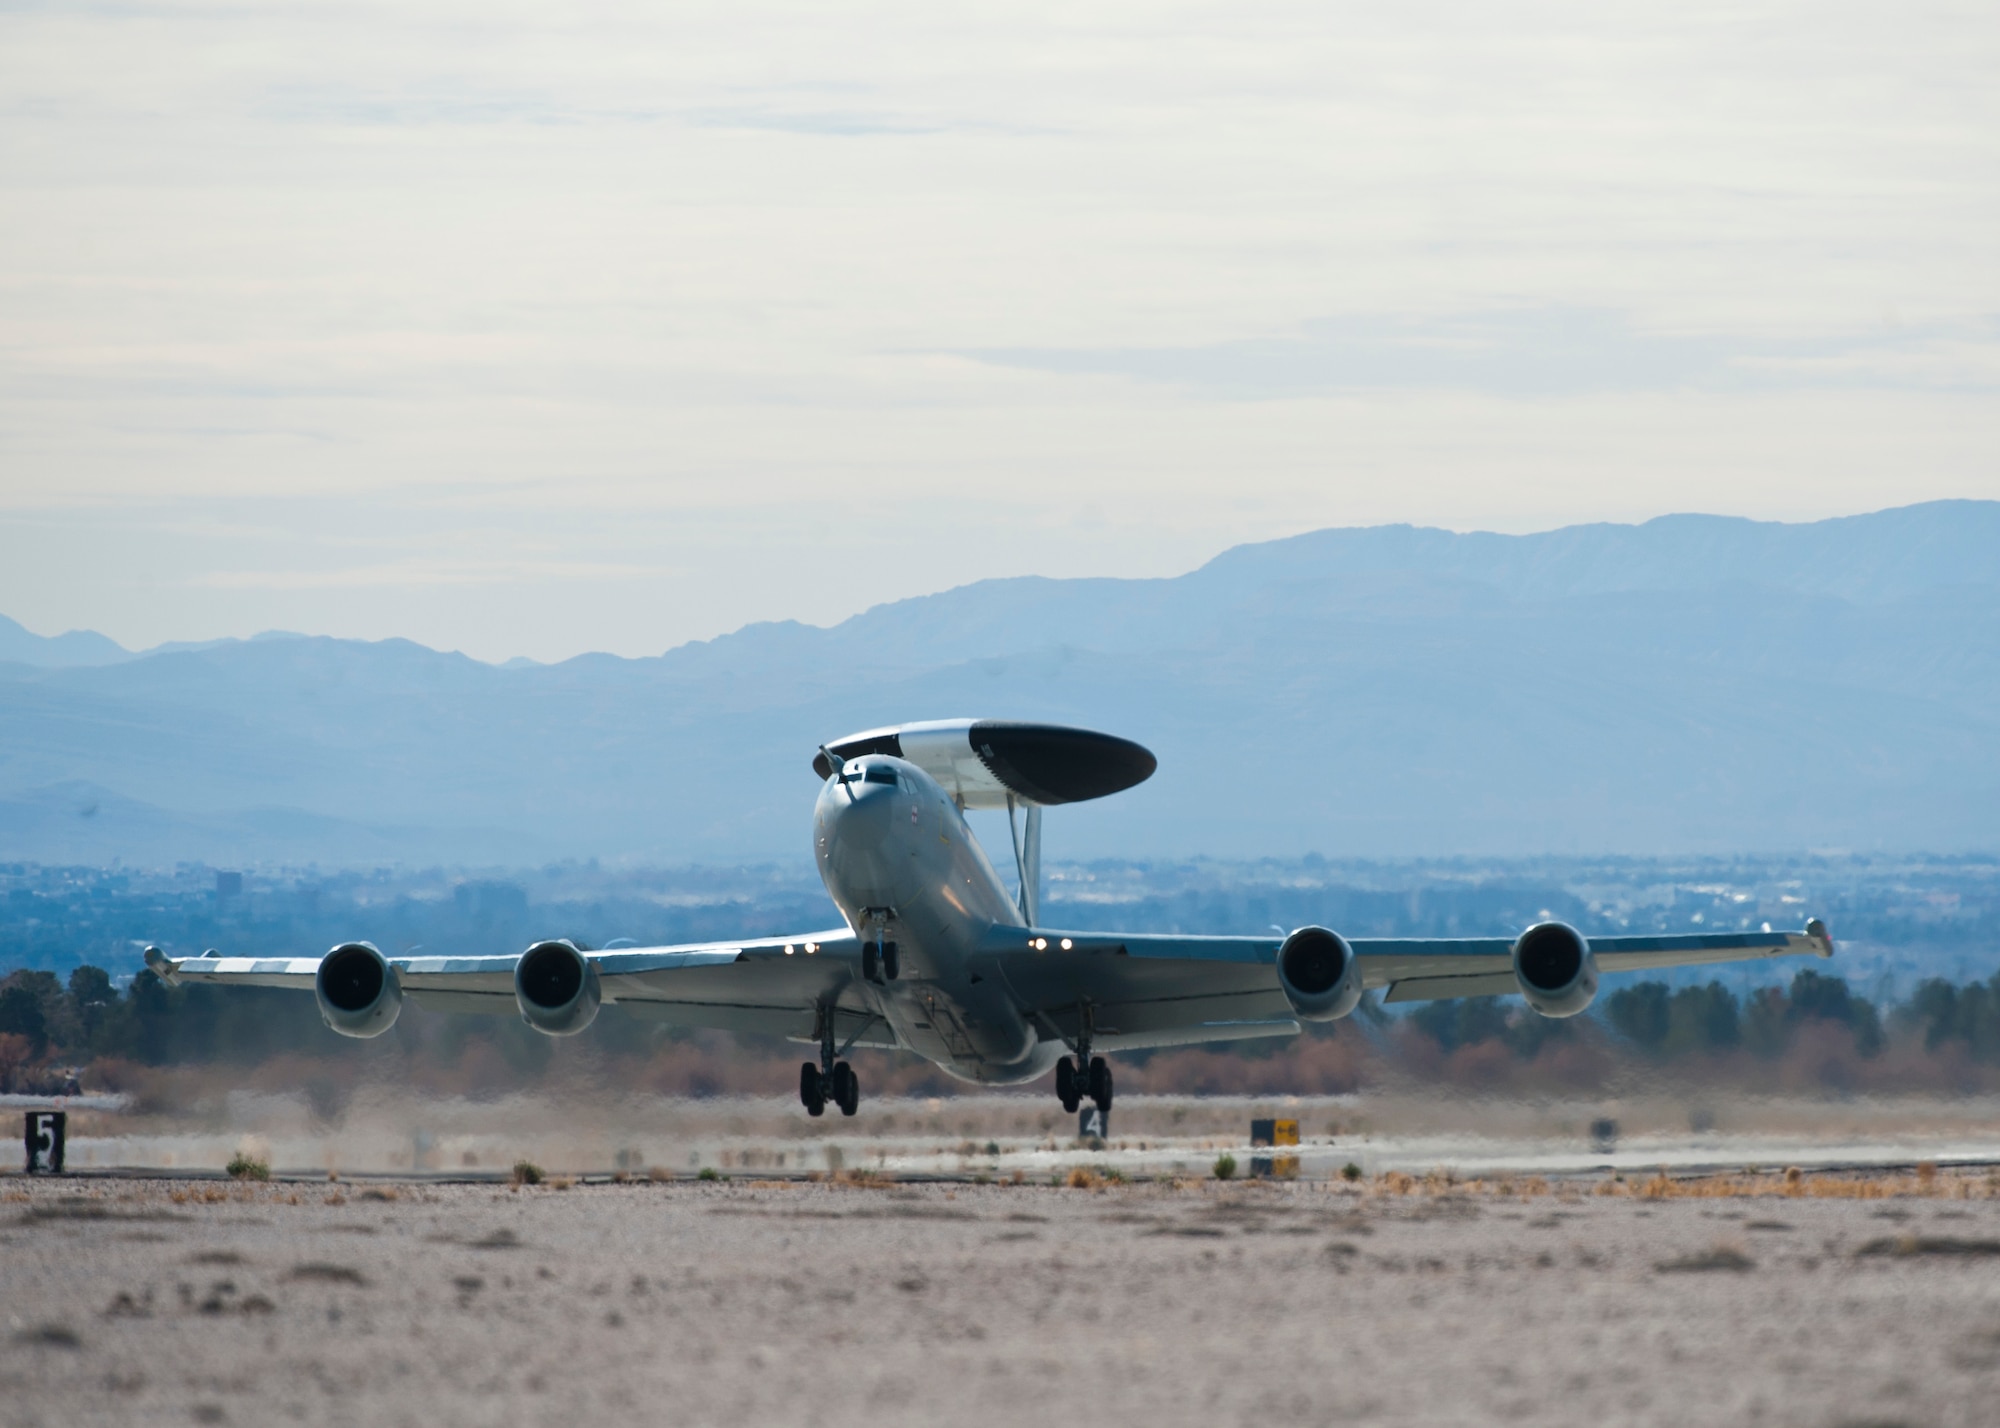 A Royal Air Force E-3 Sentry assigned to the VIII Squadron at RAF Station Waddington, United Kingdeom. takes off during Red Flag 14-1 Jan. 28, 2014, at Nellis Air Force Base, Nev. The E-3 Sentry provides situational awareness of friendly, neutral and hostile activity, command and control of an area of responsibility, battle management of theater forces, all-altitude and all-weather surveillance of the battle space, and early warning of enemy during joint, allied and coalition operations. Red Flag 14-1 is an air-to-air combat training exercise designed to increase combat effectiveness and has expanded to incorporate all spectrums of warfare including command and control, real-time intelligence, analysis and exploitation and electronic warfare. (U.S. Air Force photo by Airman 1st Class Thomas Spangler)